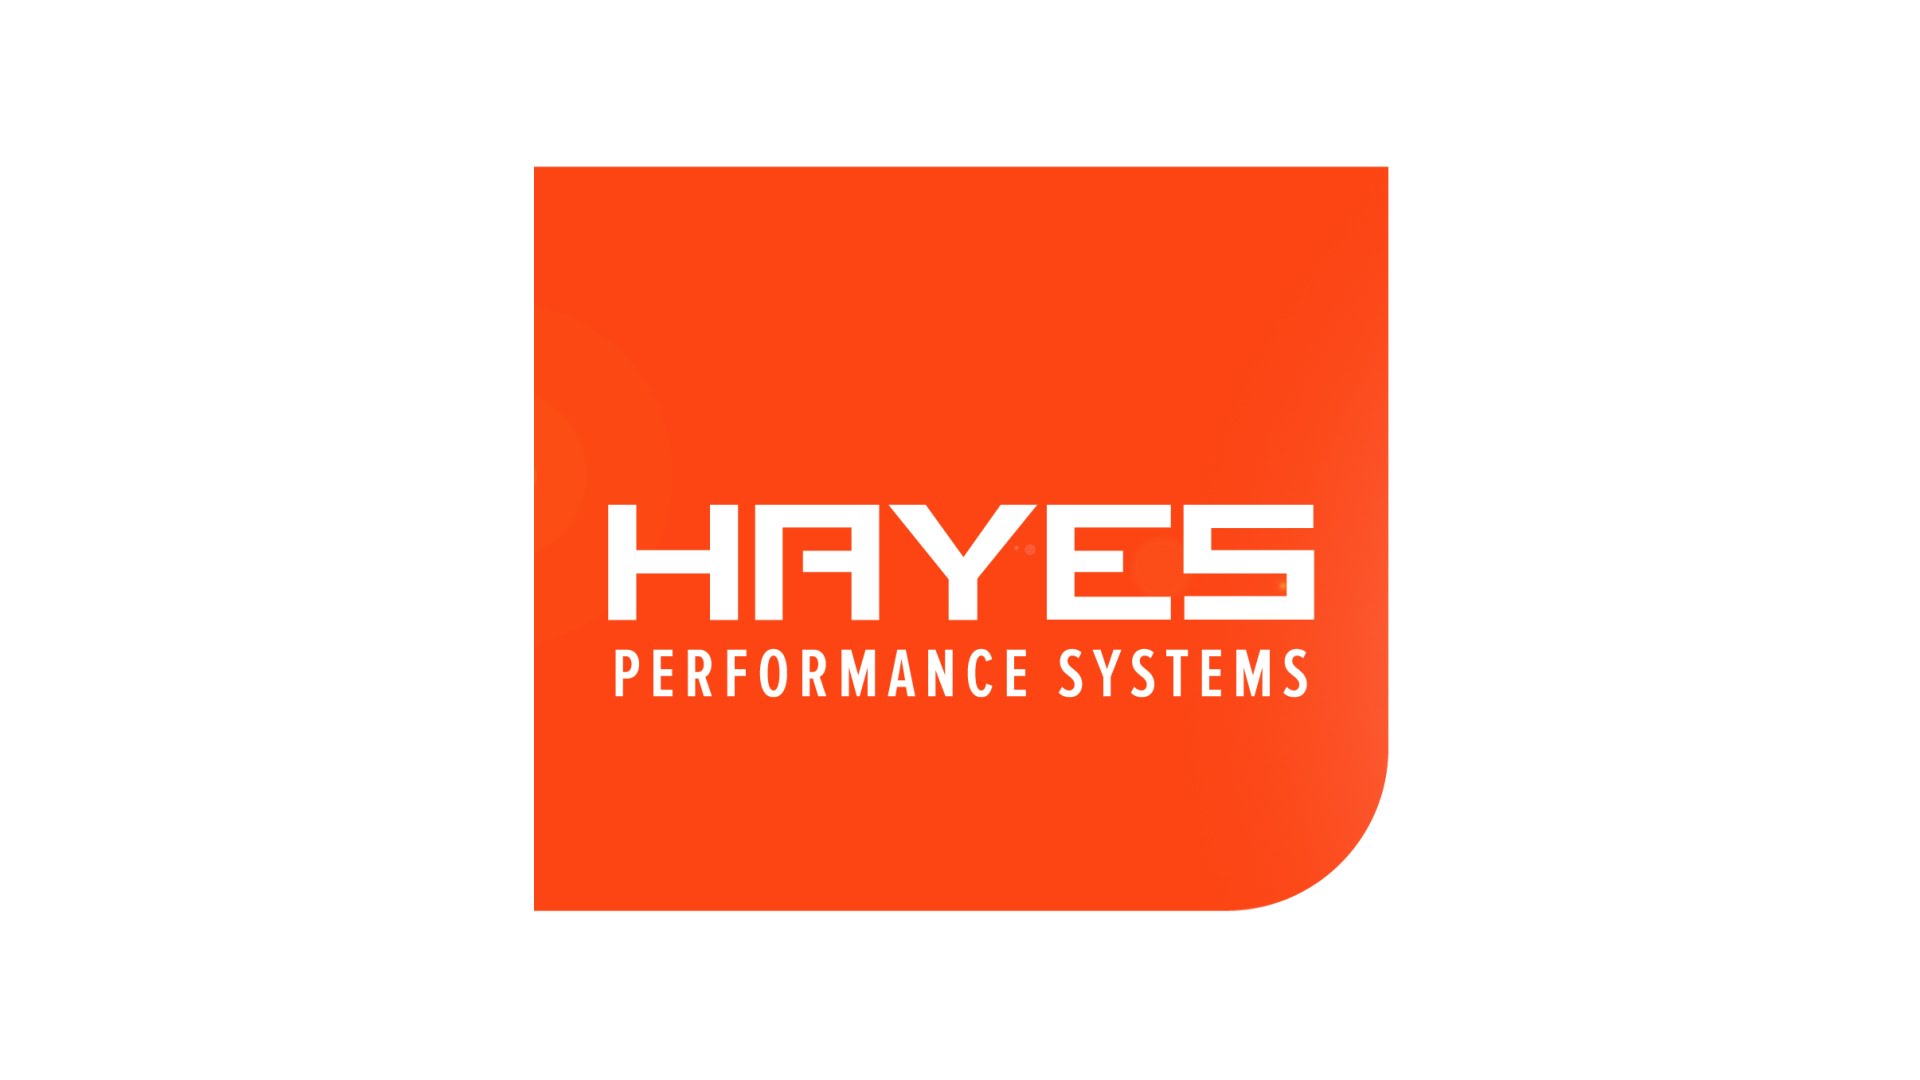 hayes-performance-systems-integrates-reynolds-cycling-into-european-headquarters